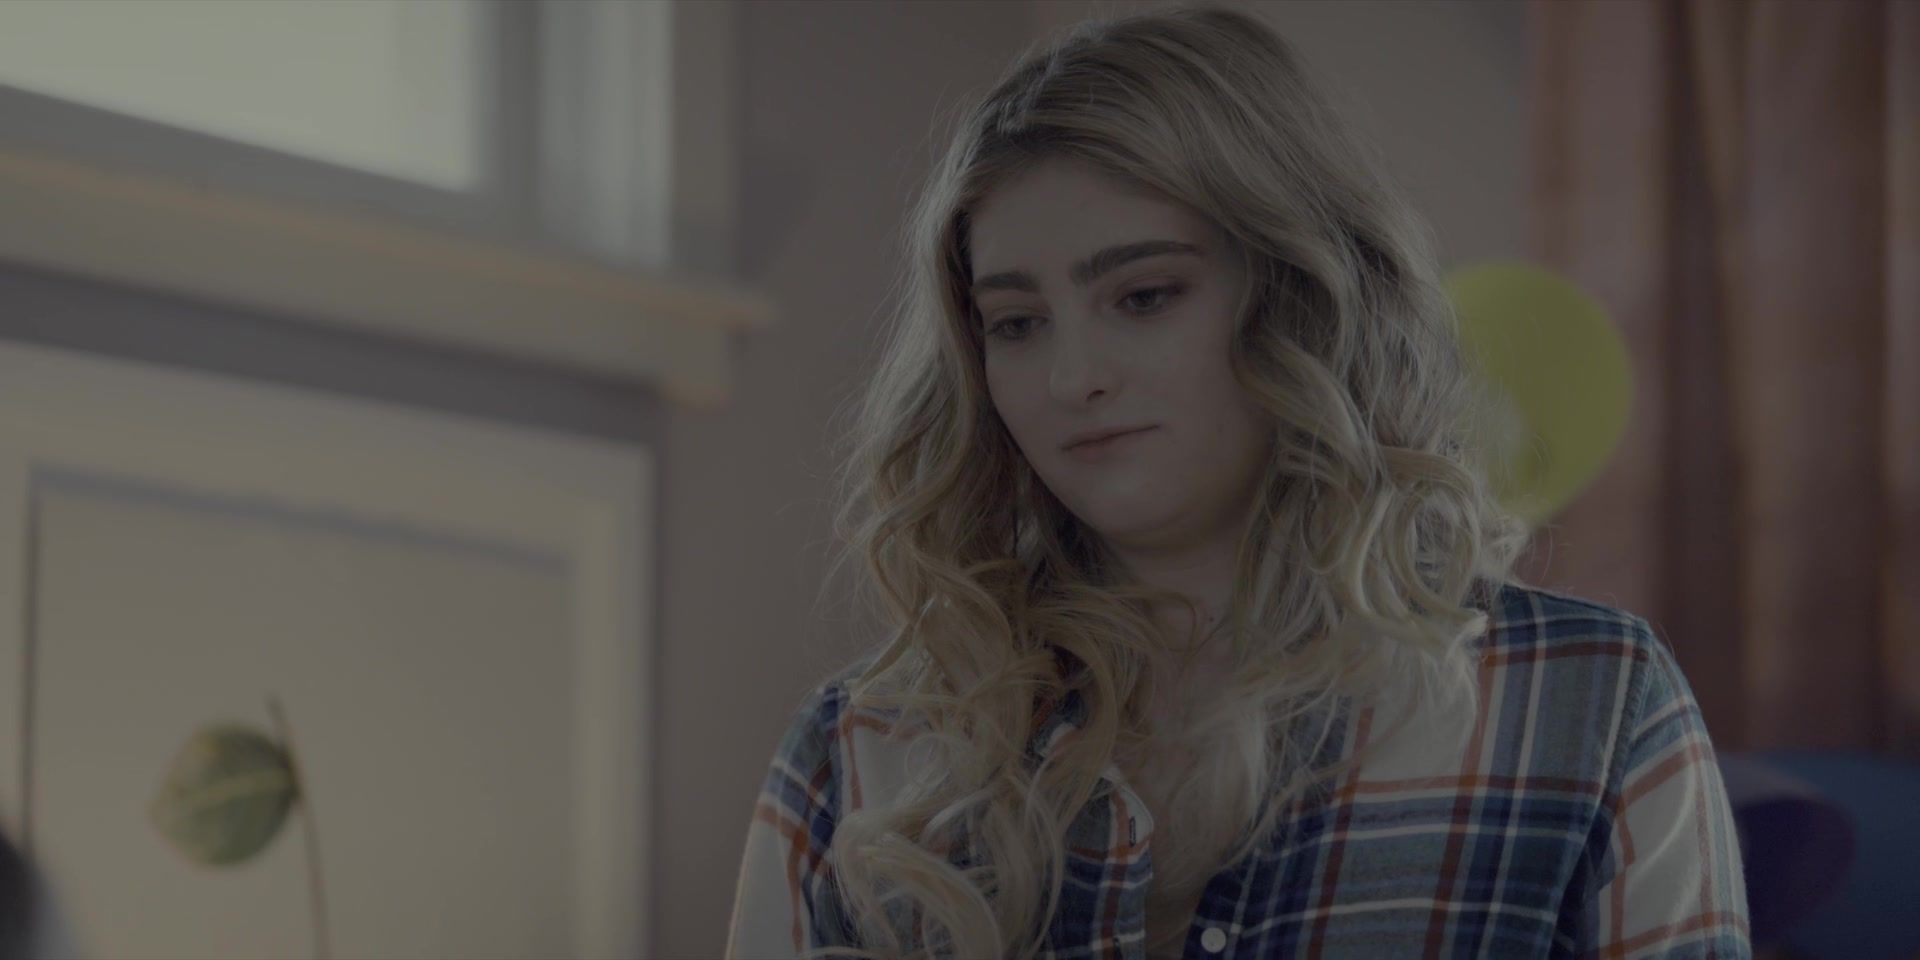 Boys Nude Willow Shields, Sarah Wright - Spinning Out s01e09-10 (2020) Footfetish